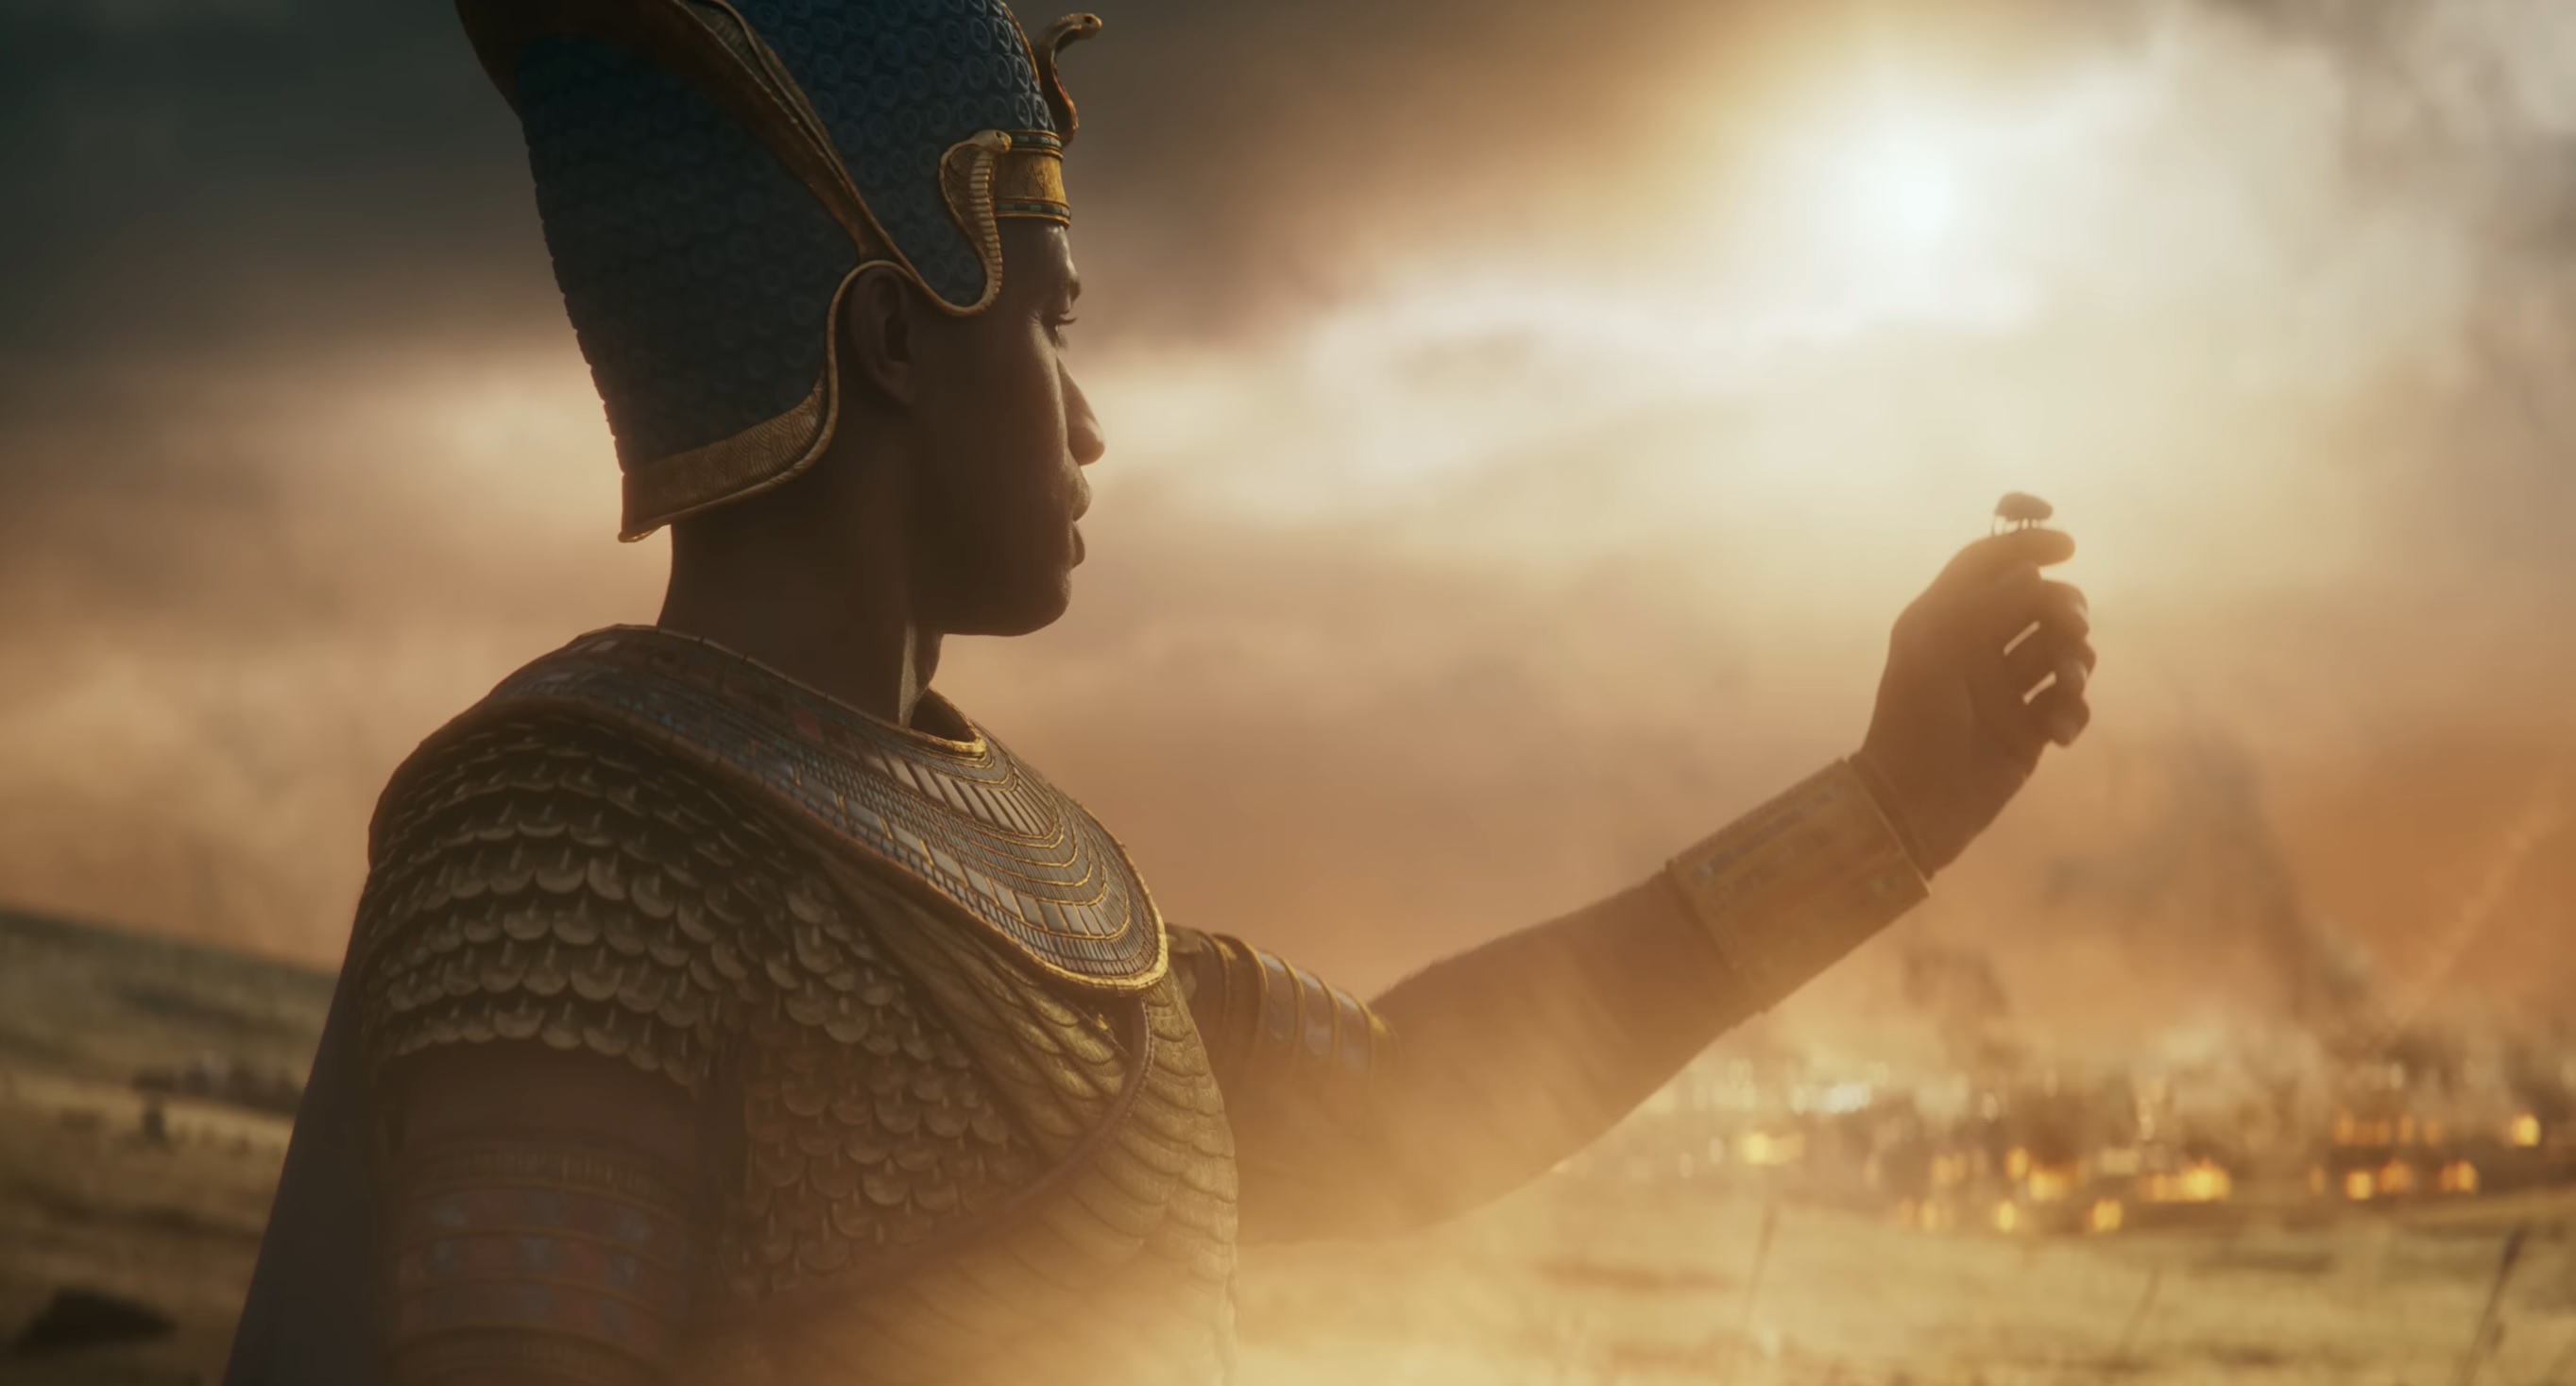  Meet the leaders of Egypt, Canaan, and Hattusa in Total War: Pharaoh 